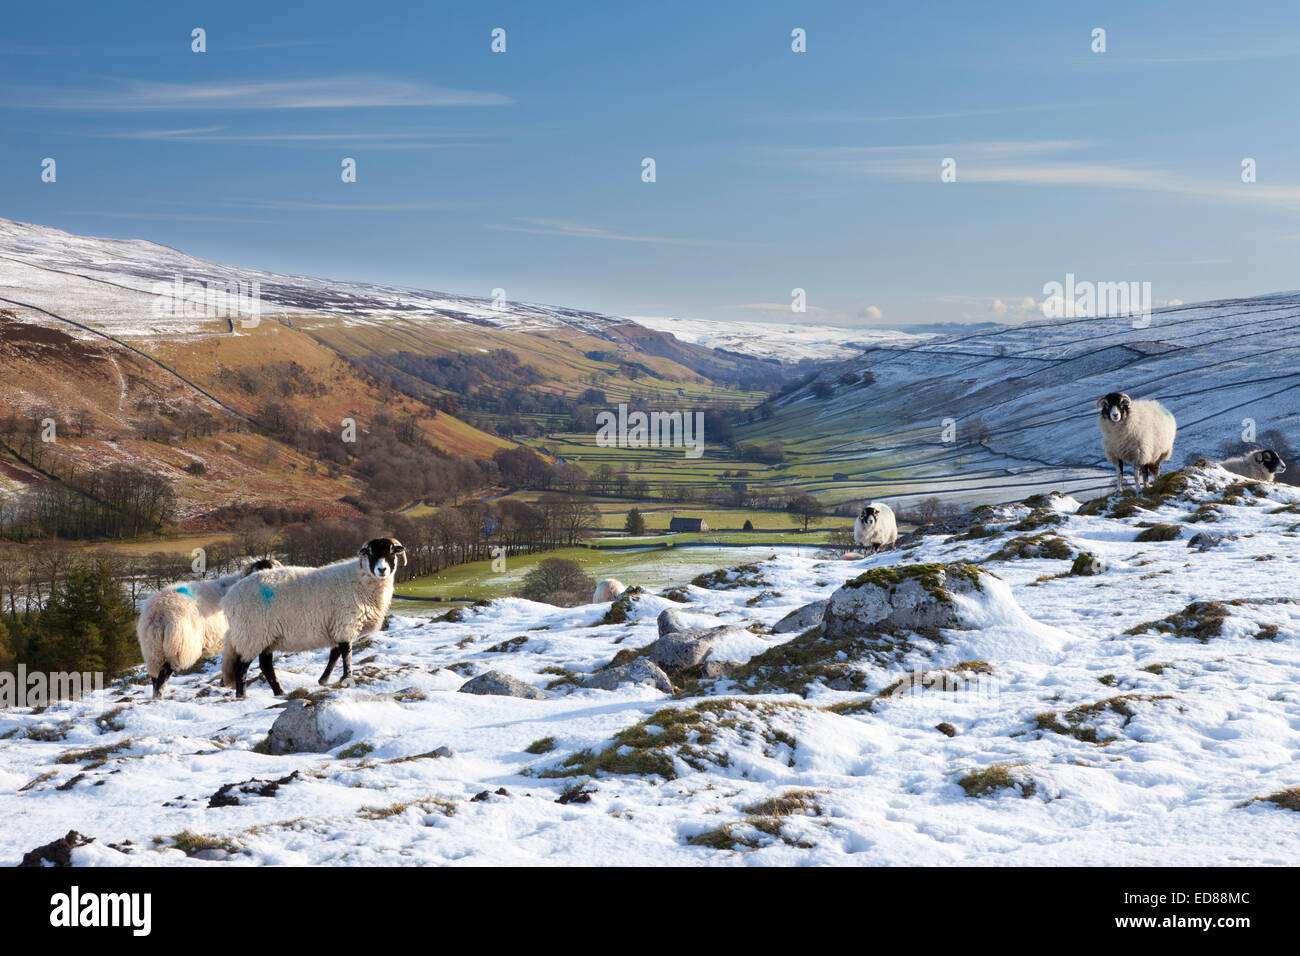 Littondale under snow in The Yorkshire Dales, England. Stock Photo